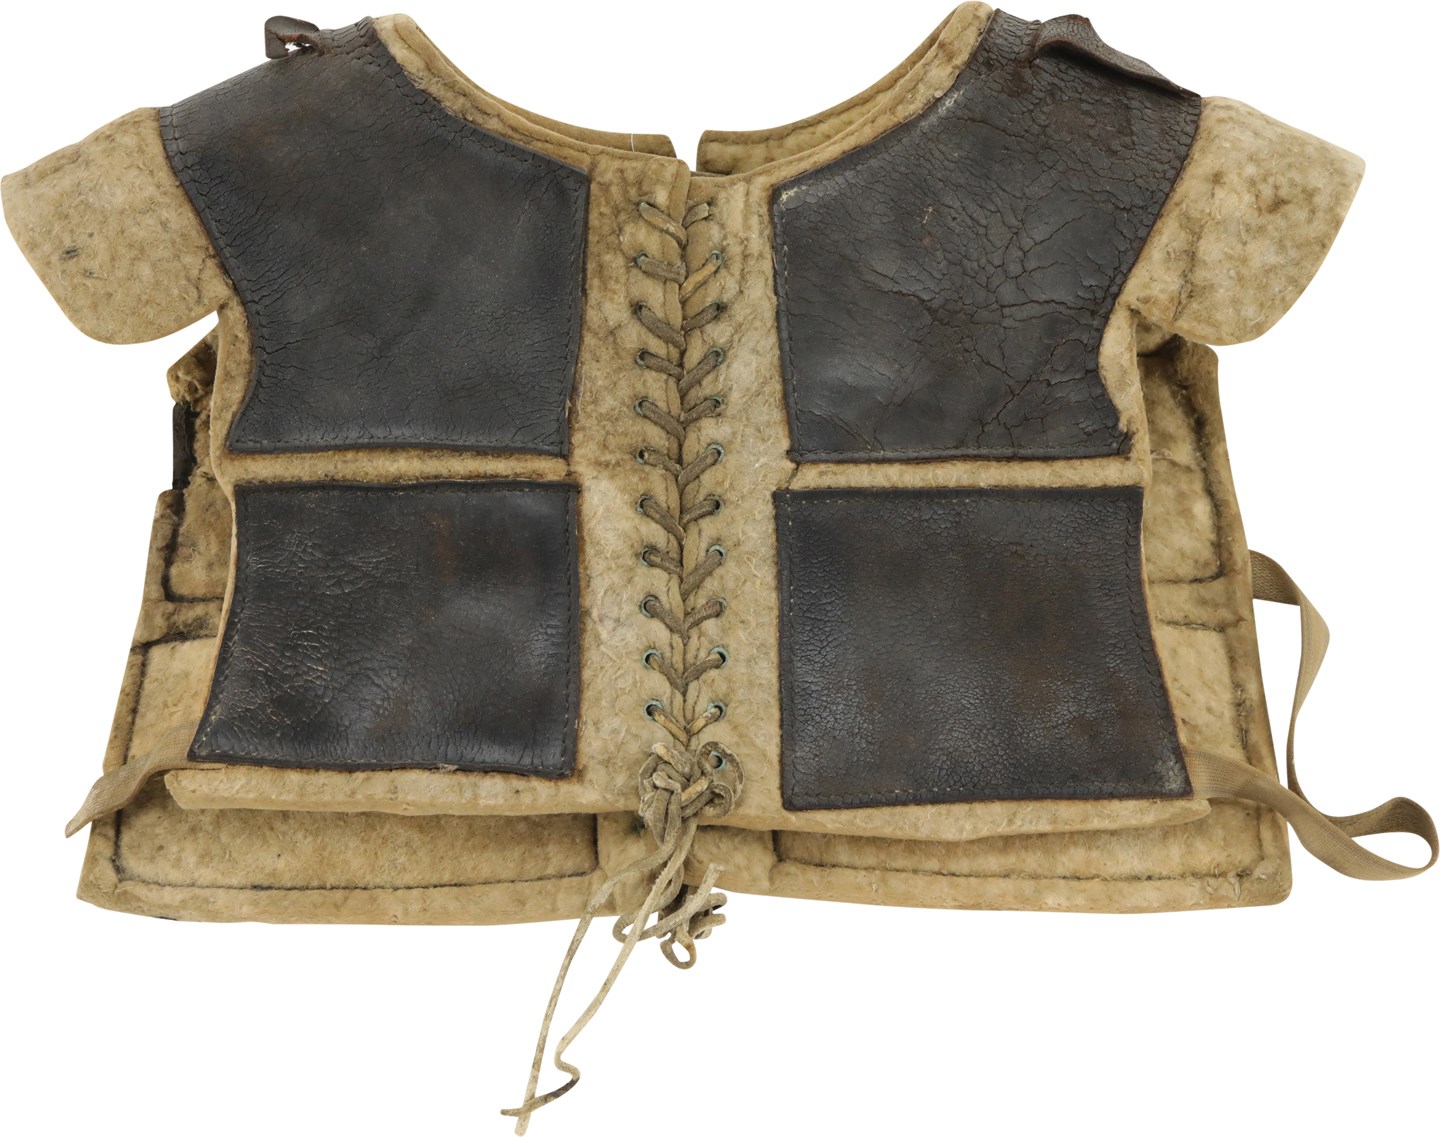 Football - Scarce Early 1900s Football Shoulder Pads